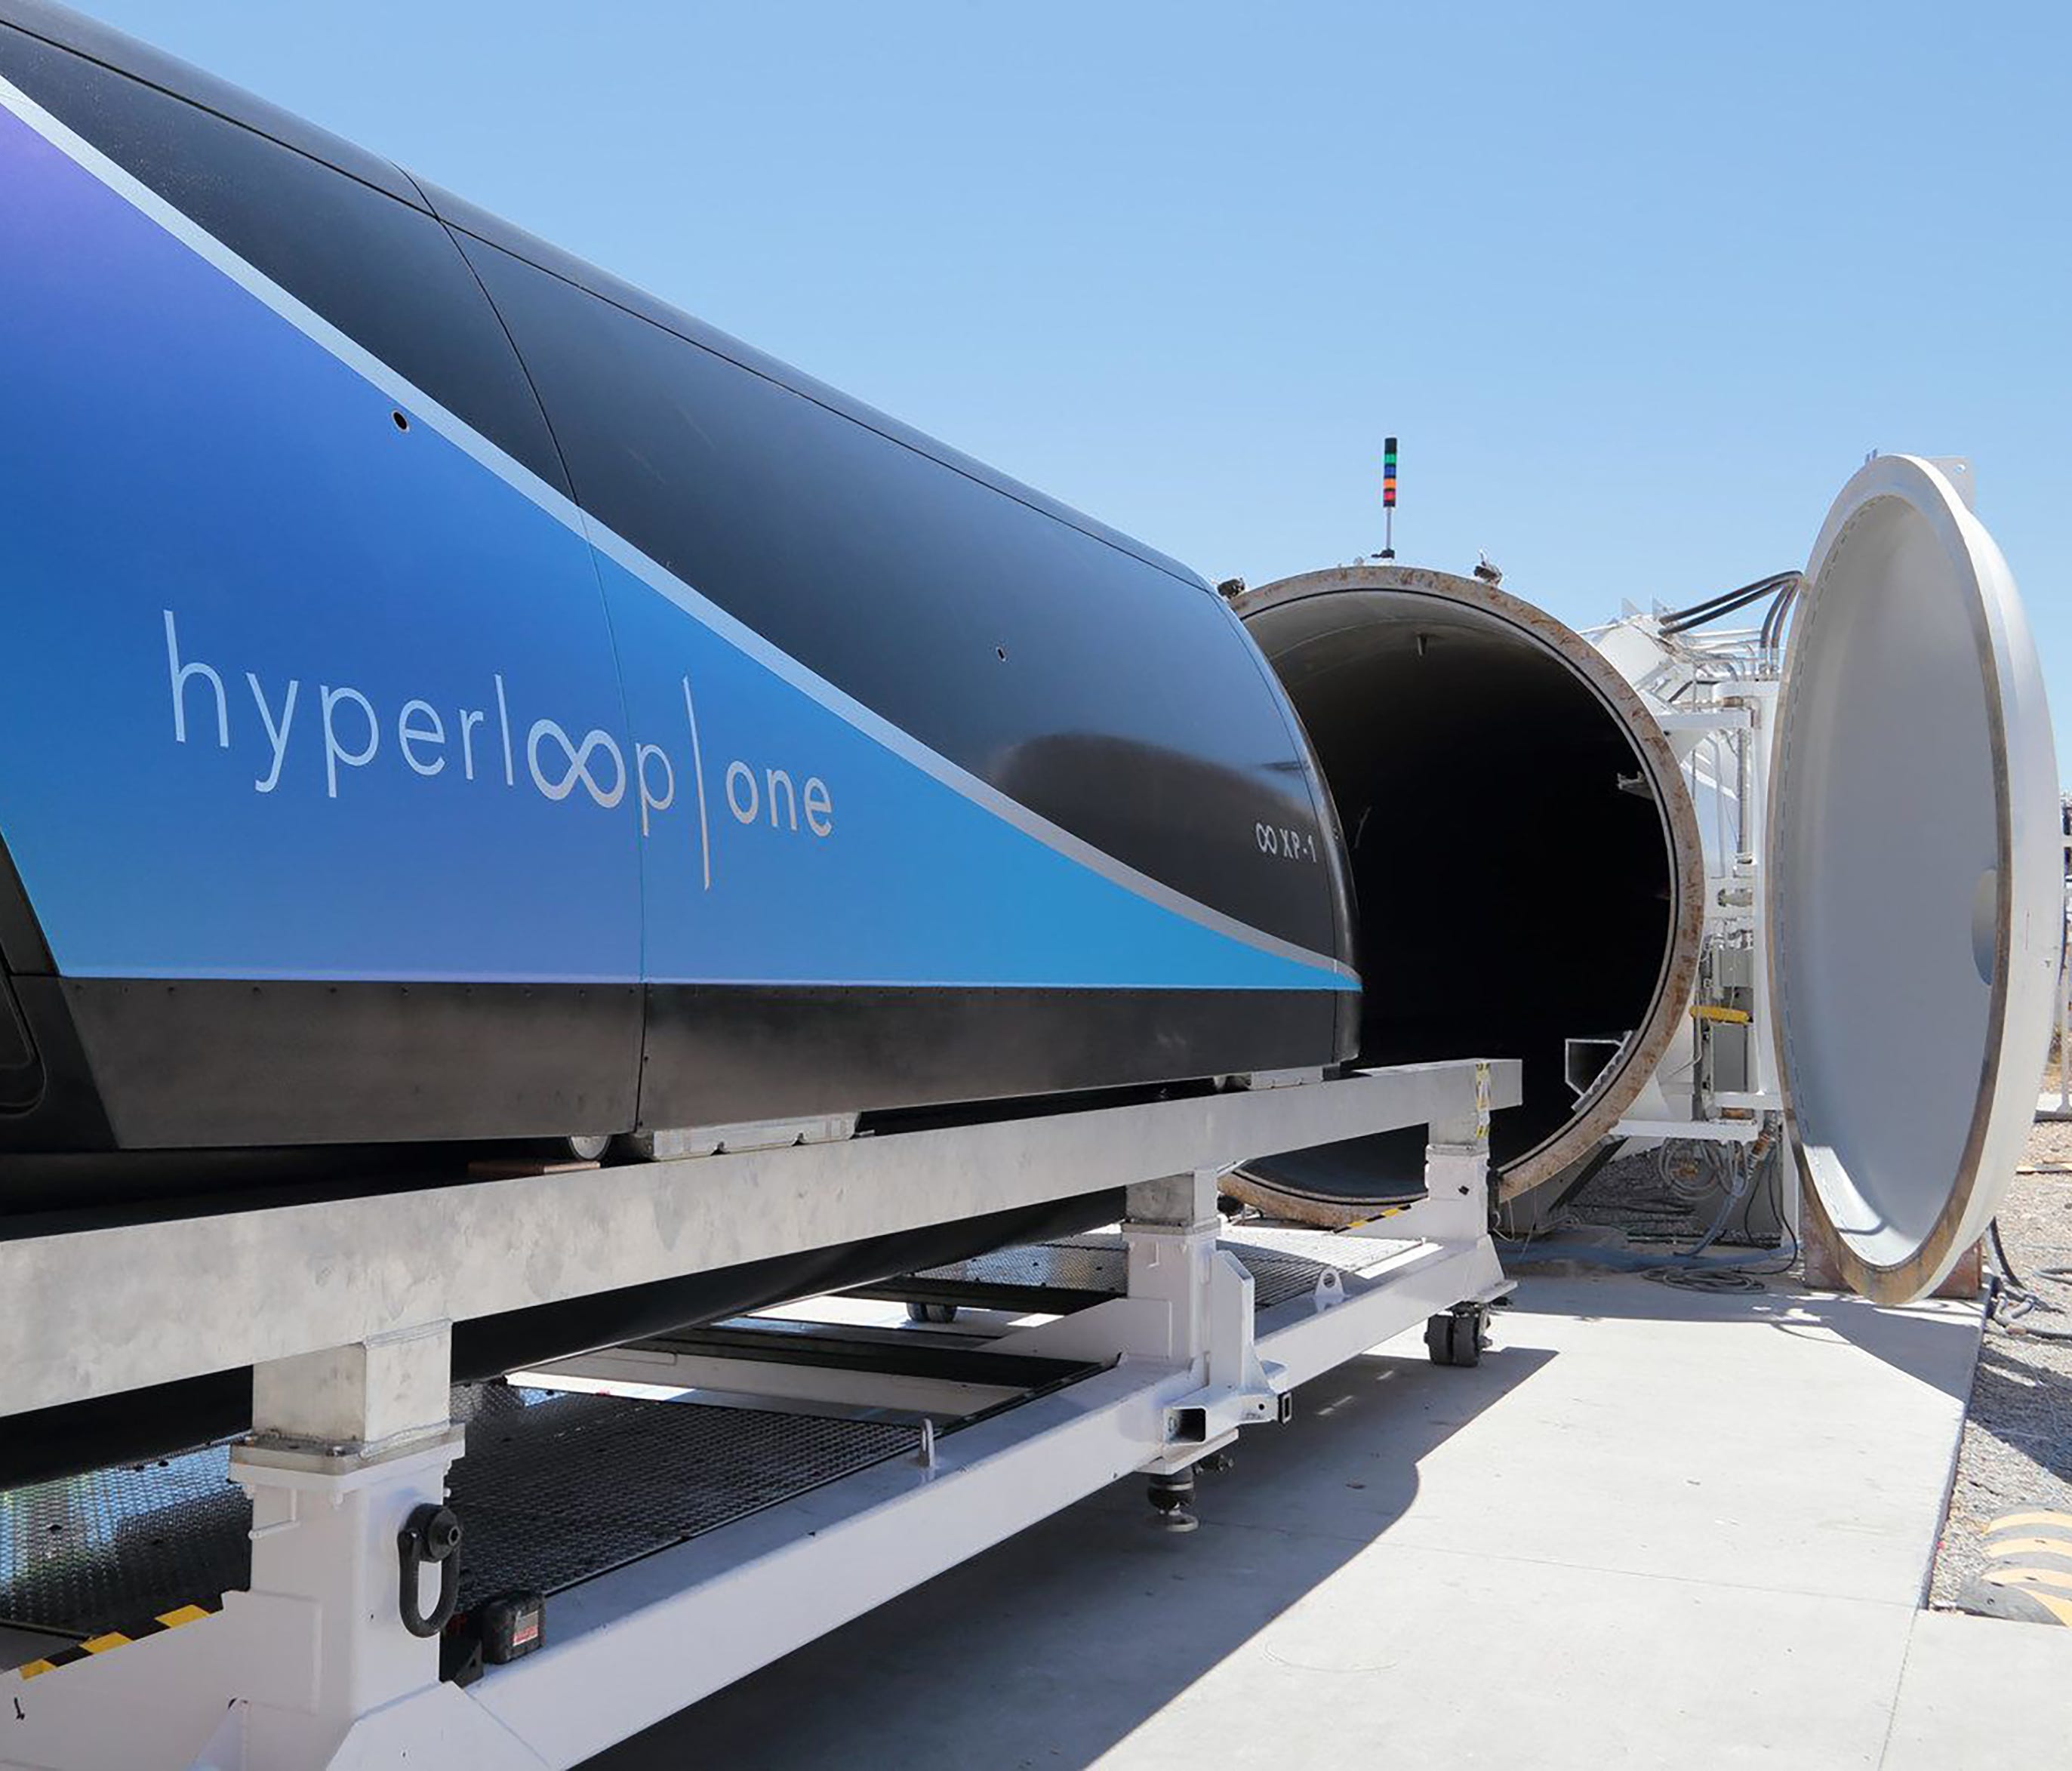 Hyperloop One's test pod hit nearly 200 mph in August 2017 in the Nevada desert.